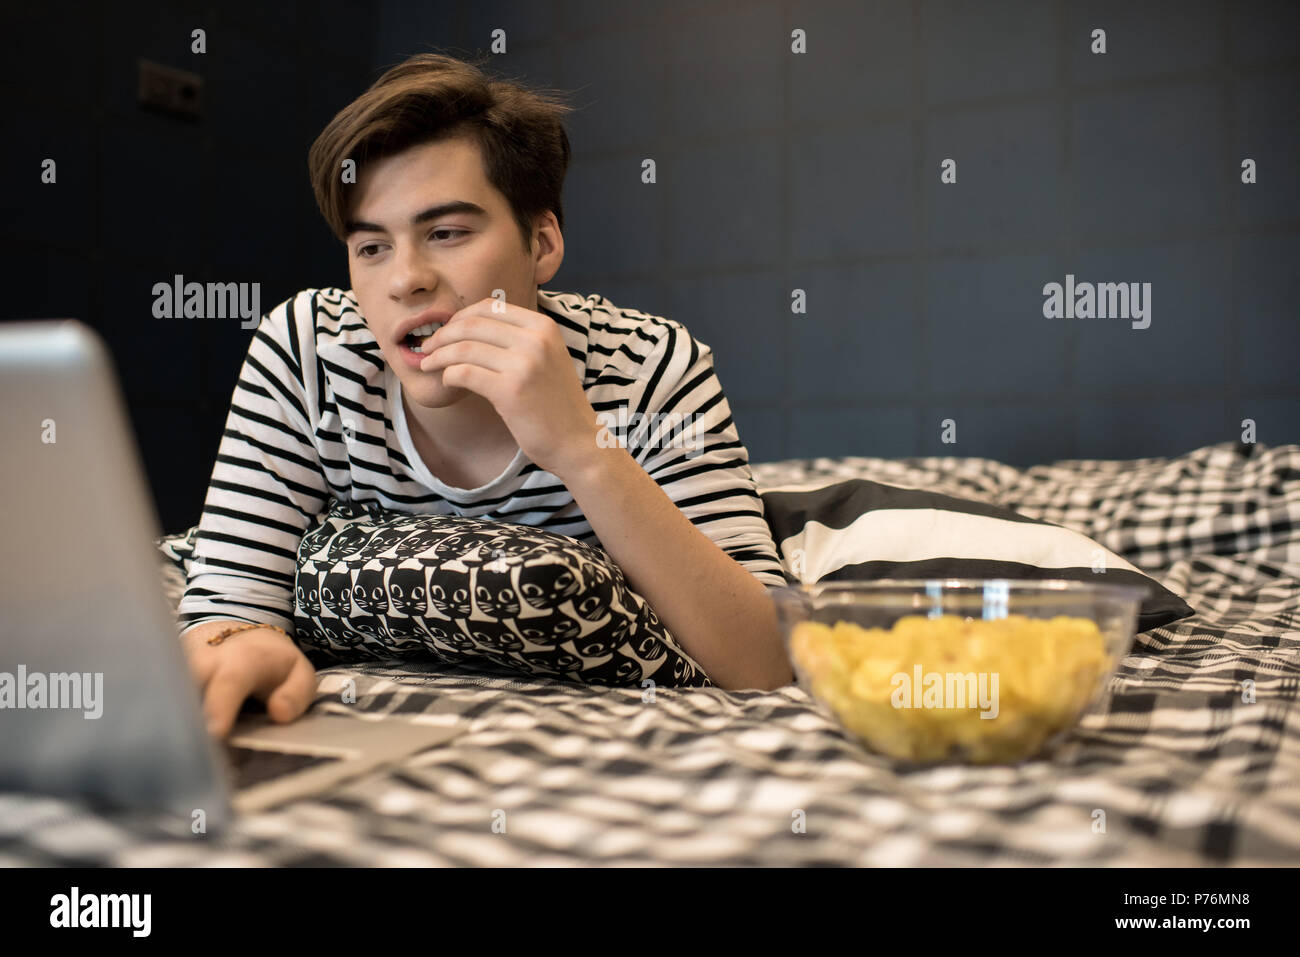 Attractive young male lying on bed and eating chips concentrated on using laptop computer. Stock Photo